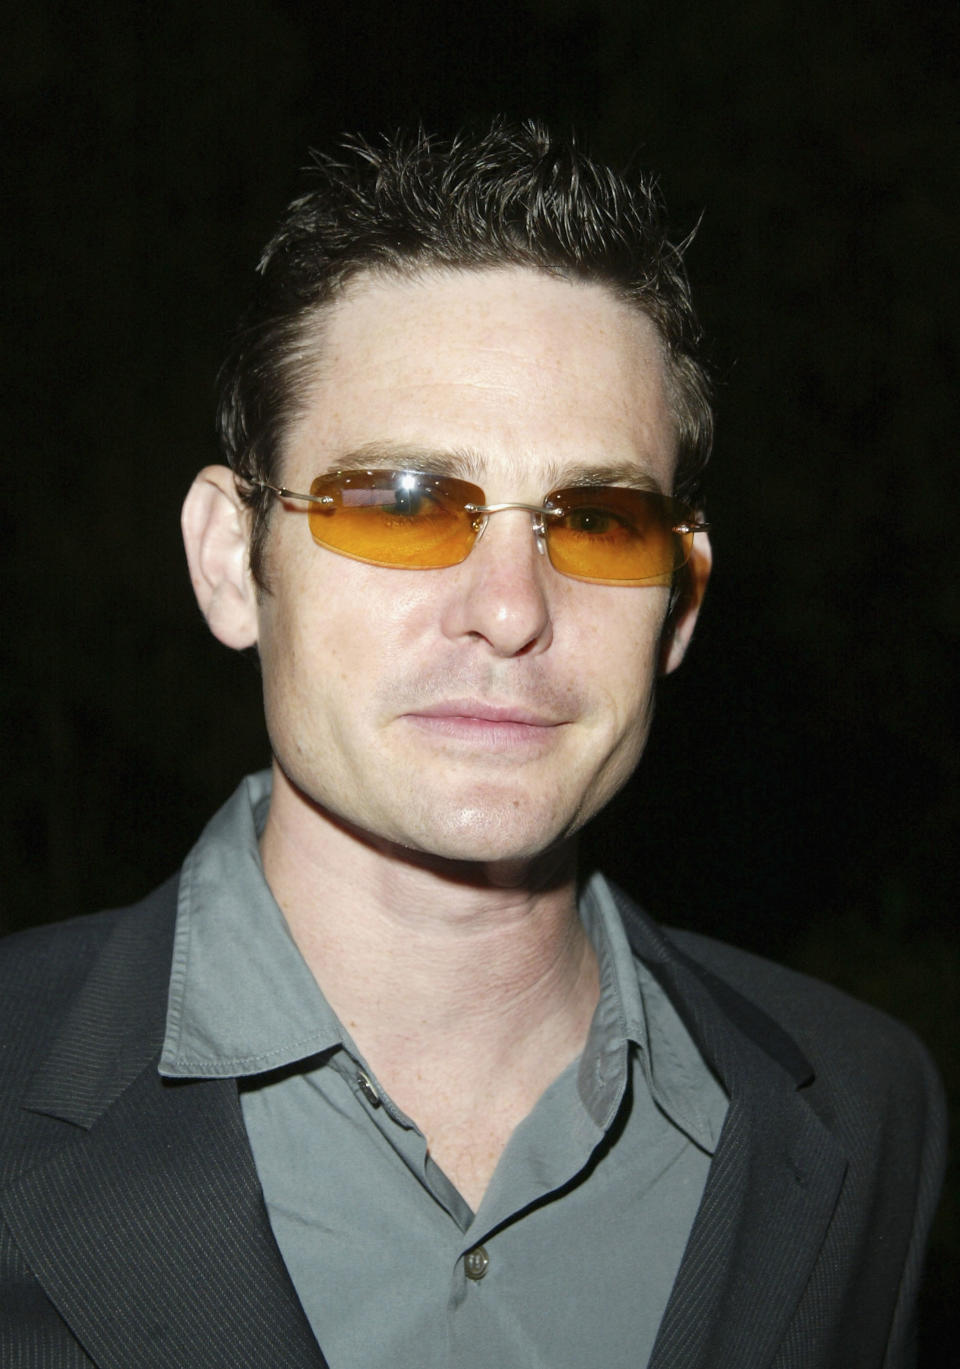 HOLMBY HILLS, CA - JUNE 10:  Actor Henry Thomas at the Distinctive Assets talent lounge for the launch of Spike TV held at the Playboy Mansion on June 10, 2003 Holmby Hills, California.  Photo by Frazer Harrison/Getty Images)